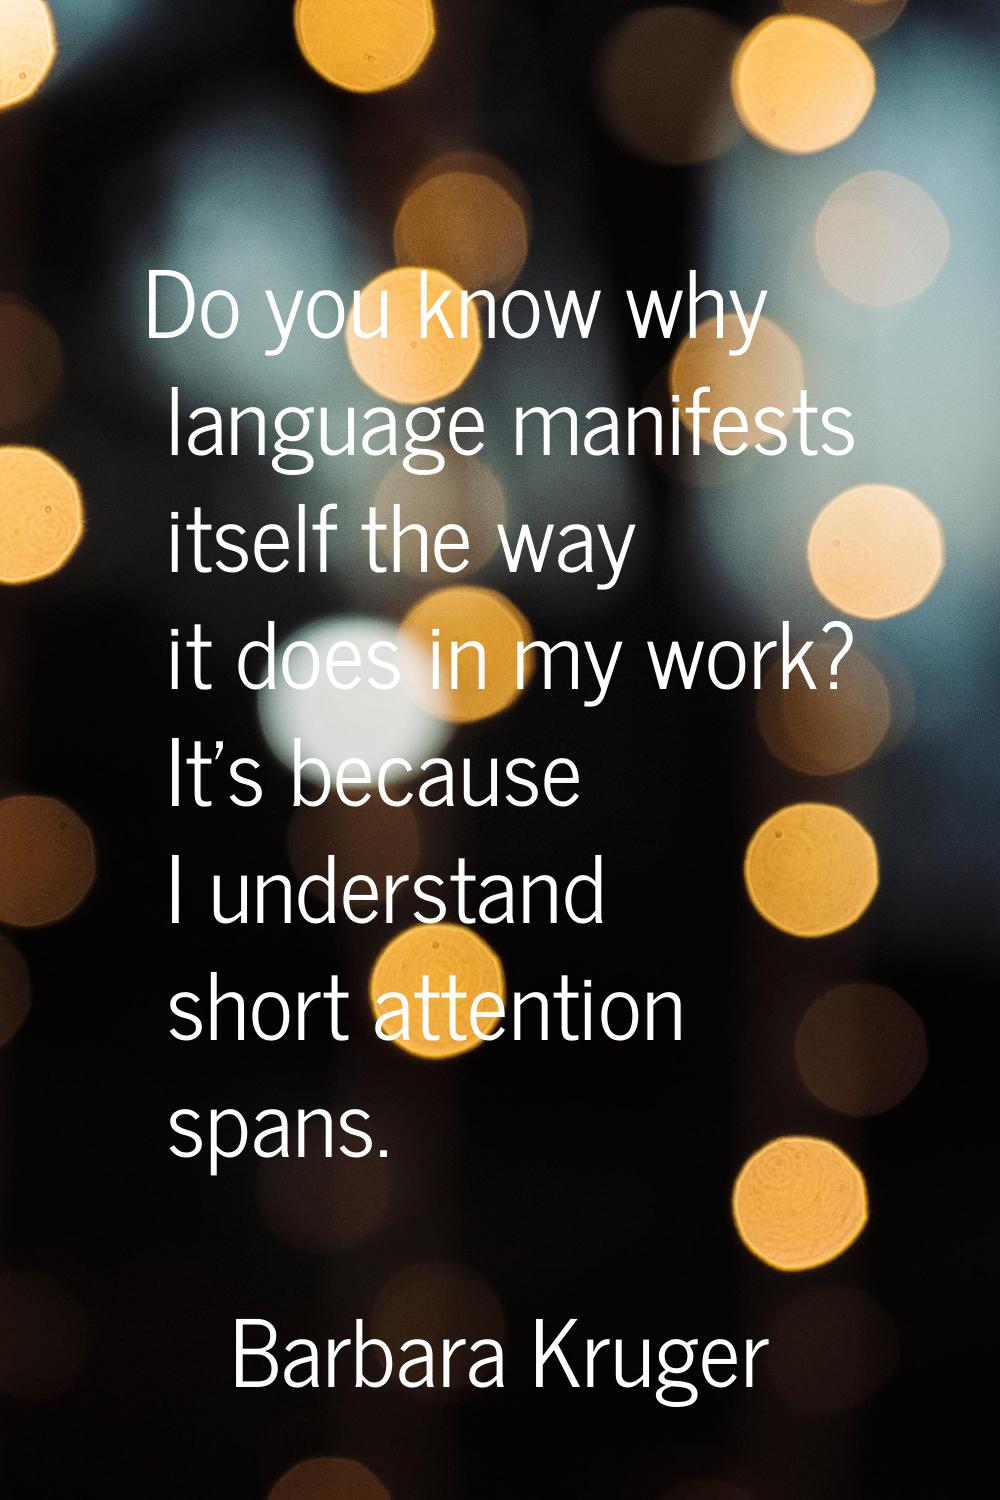 Do you know why language manifests itself the way it does in my work? It's because I understand sho